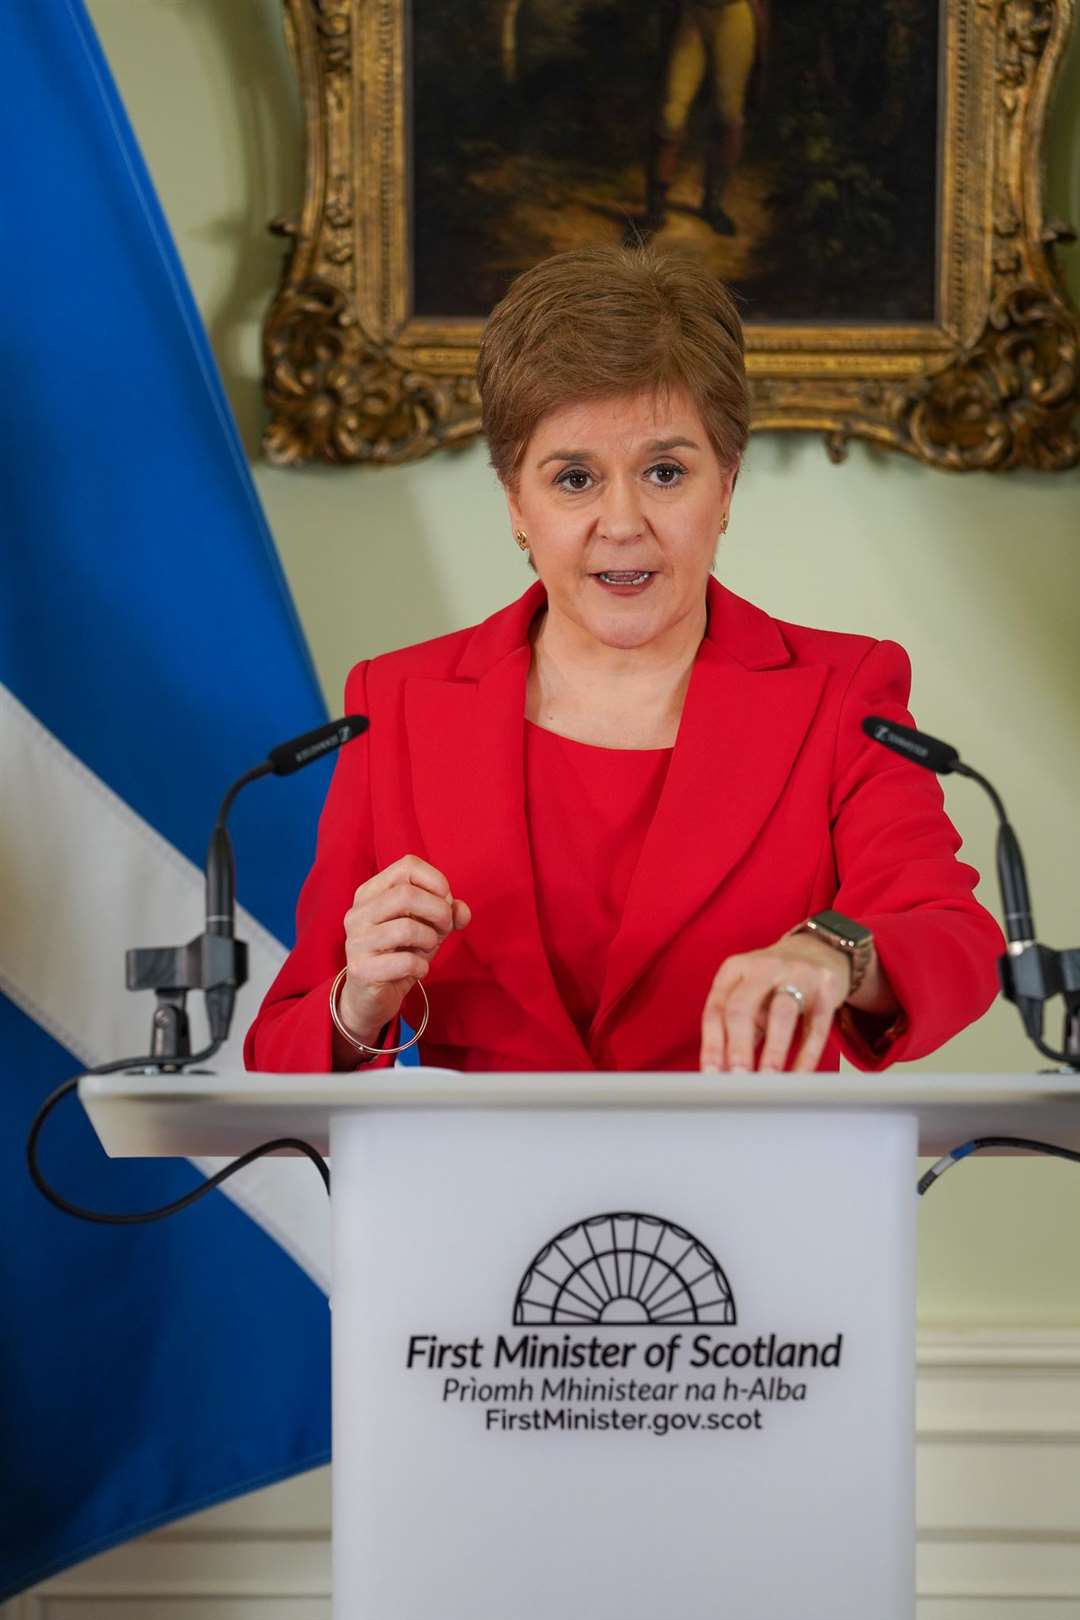 The First Minister has responded in depth to the announcement